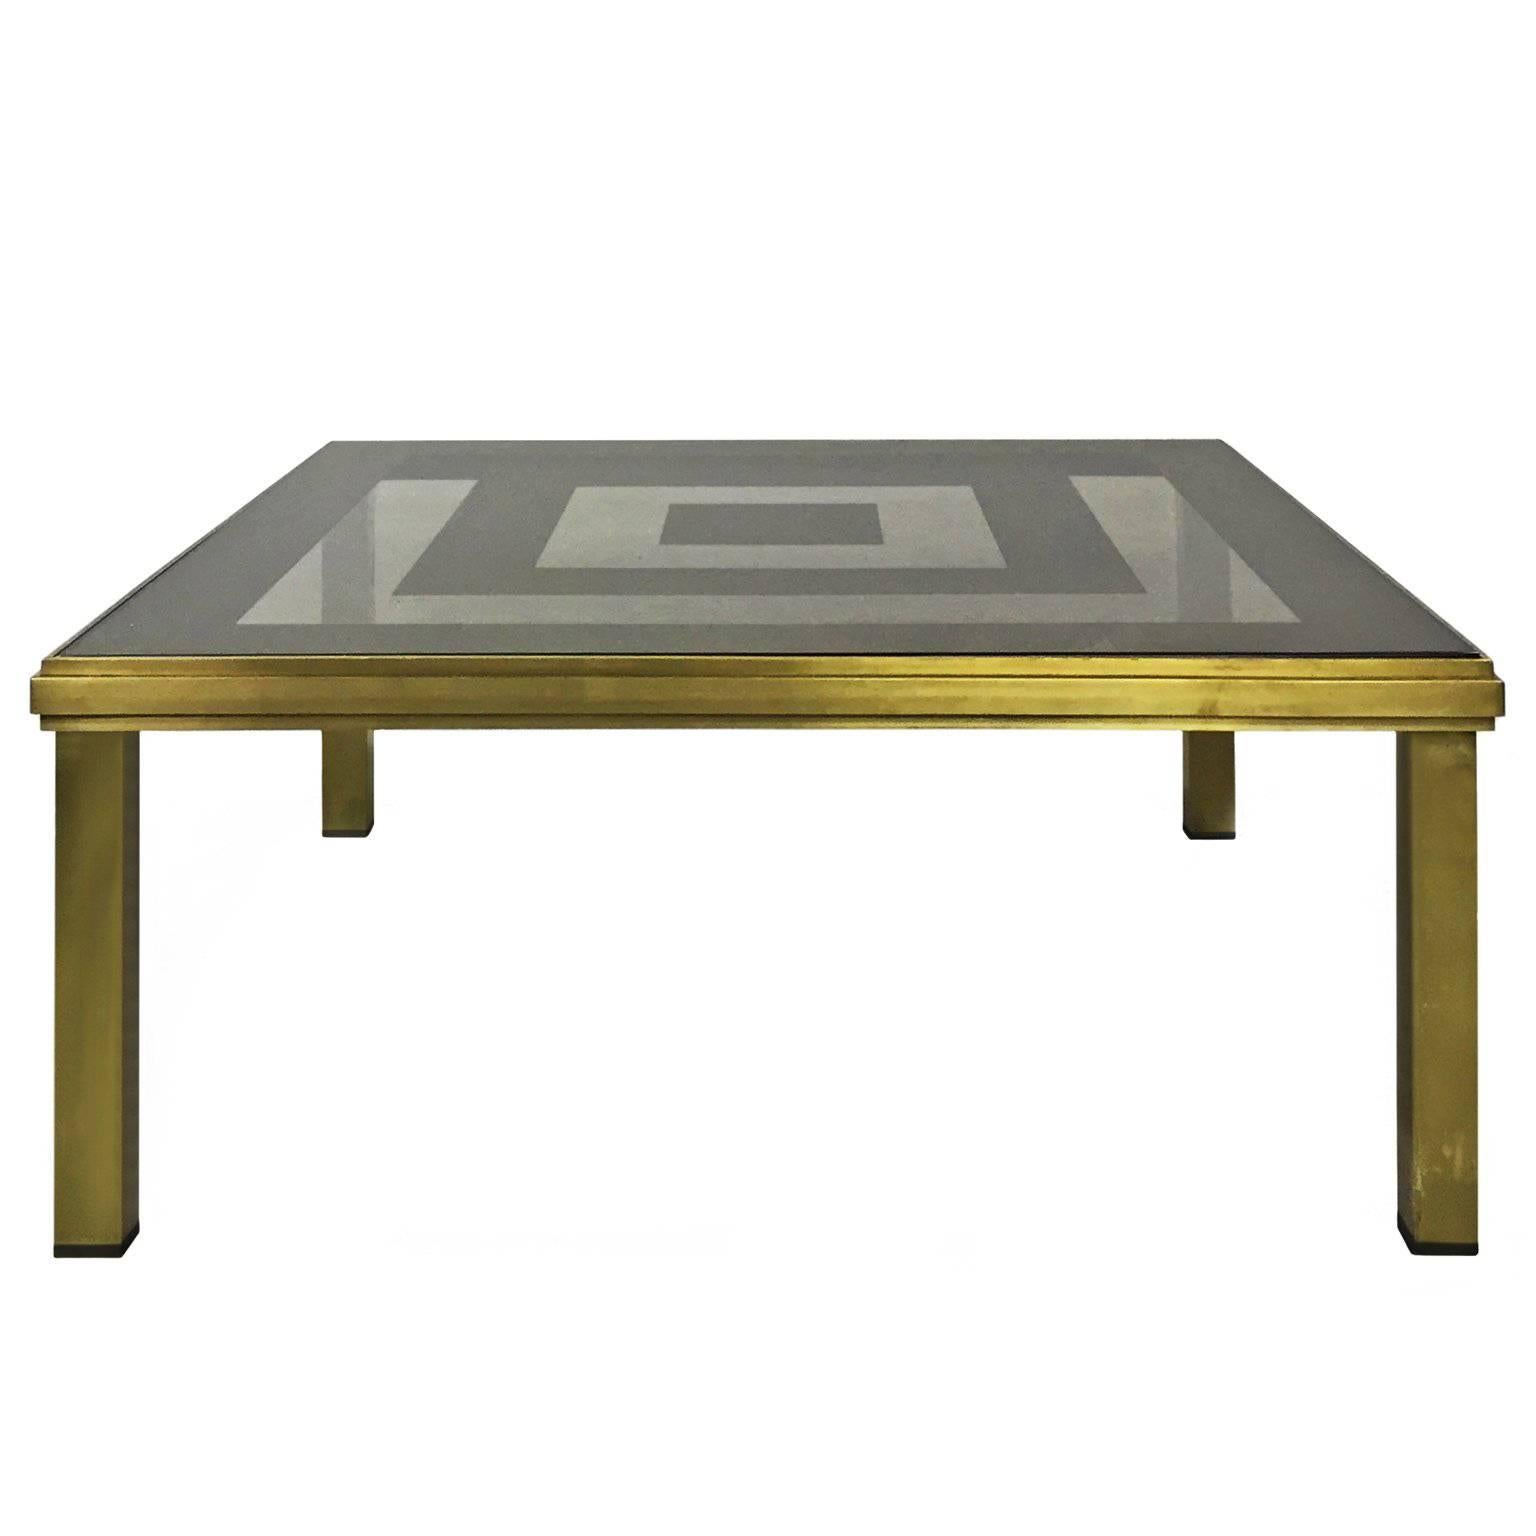 1970s French Square Brass Coffee Table with Concentric Mirror Top